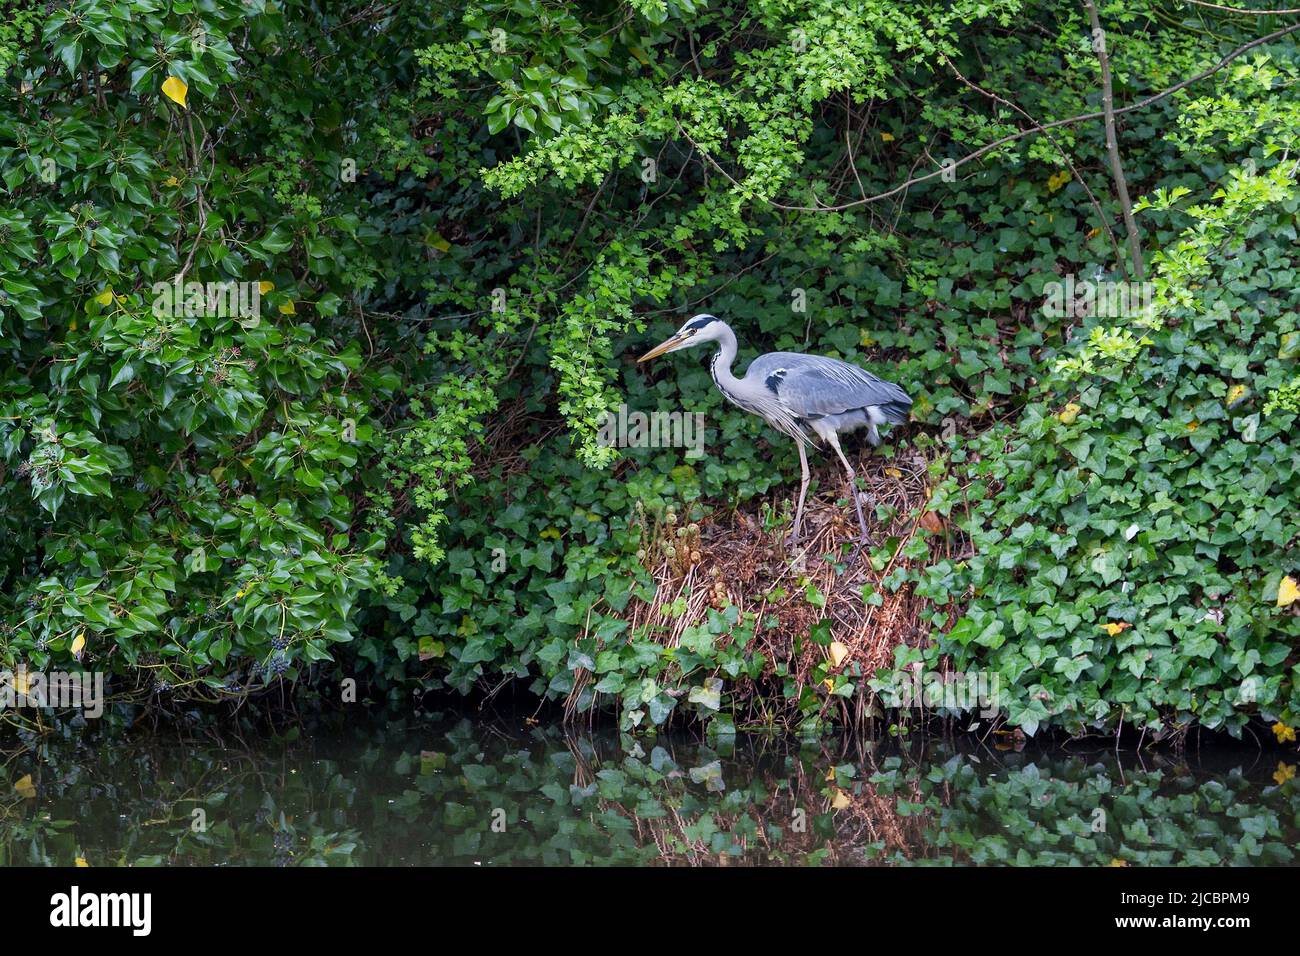 A heron standing motionless on a riverbank staring into the water. It is surrounded by thick foliage. Stock Photo